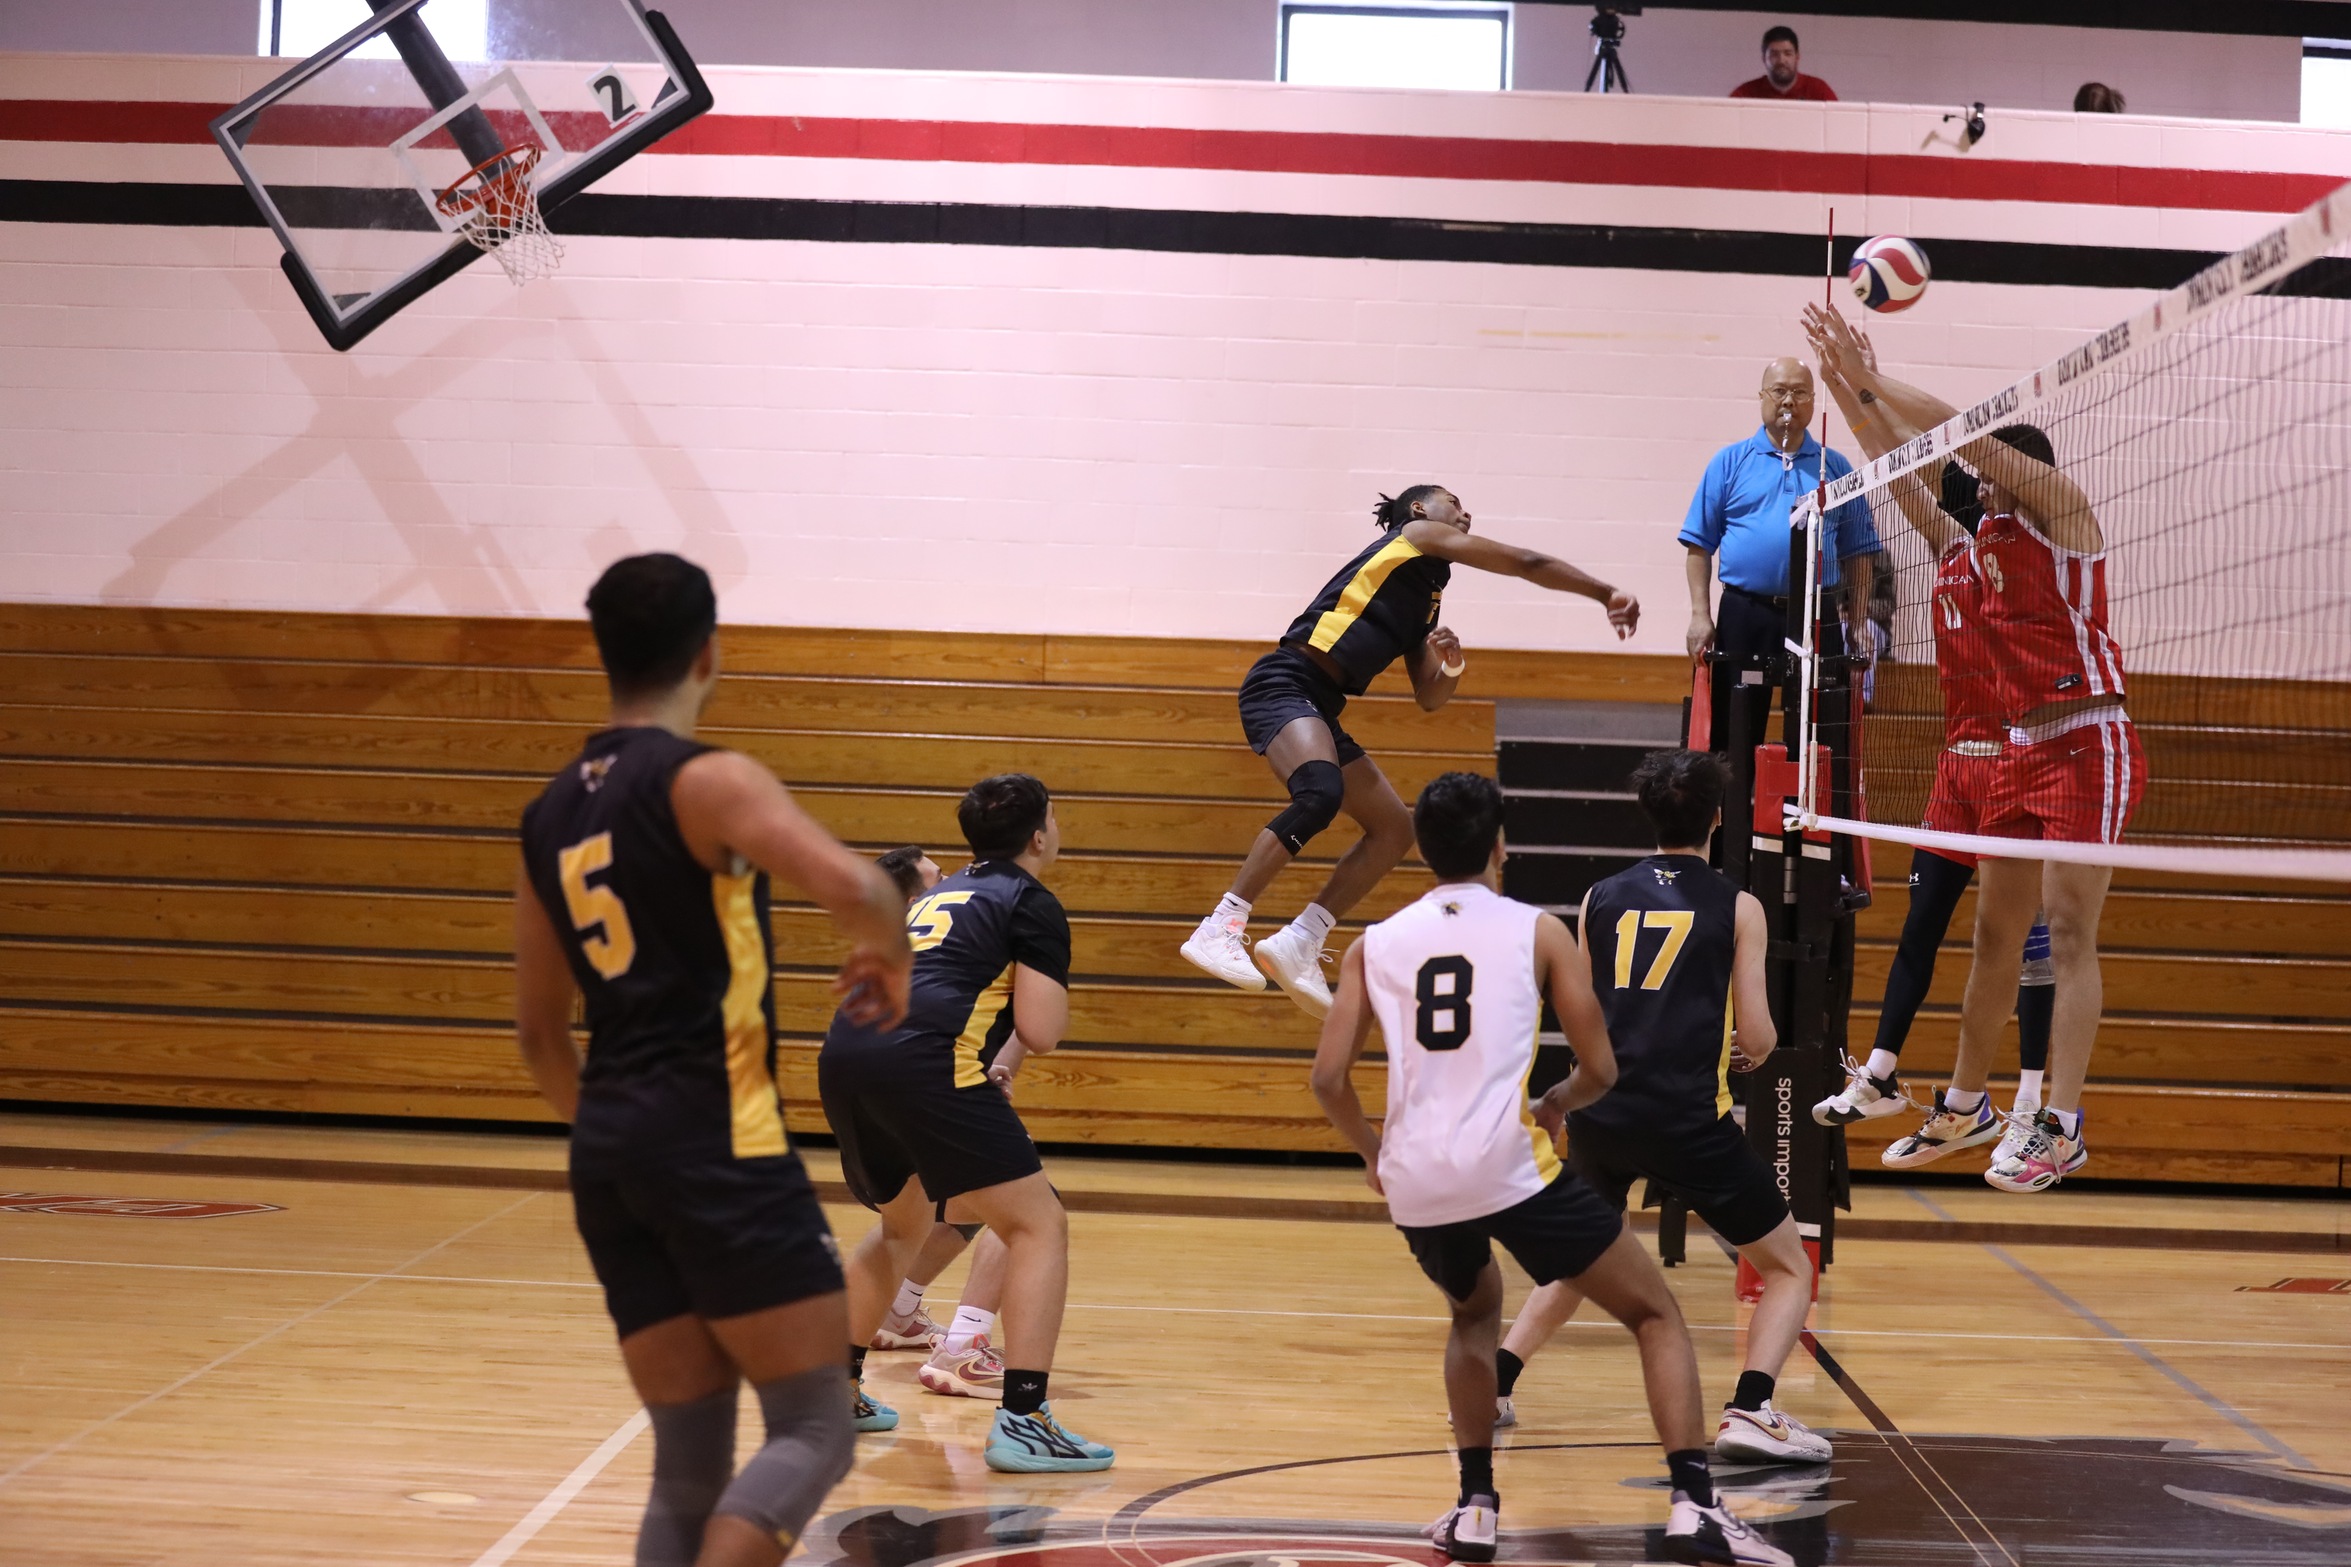 Men's Volleyball pushes top-seeded STAC to brink in playoff setback